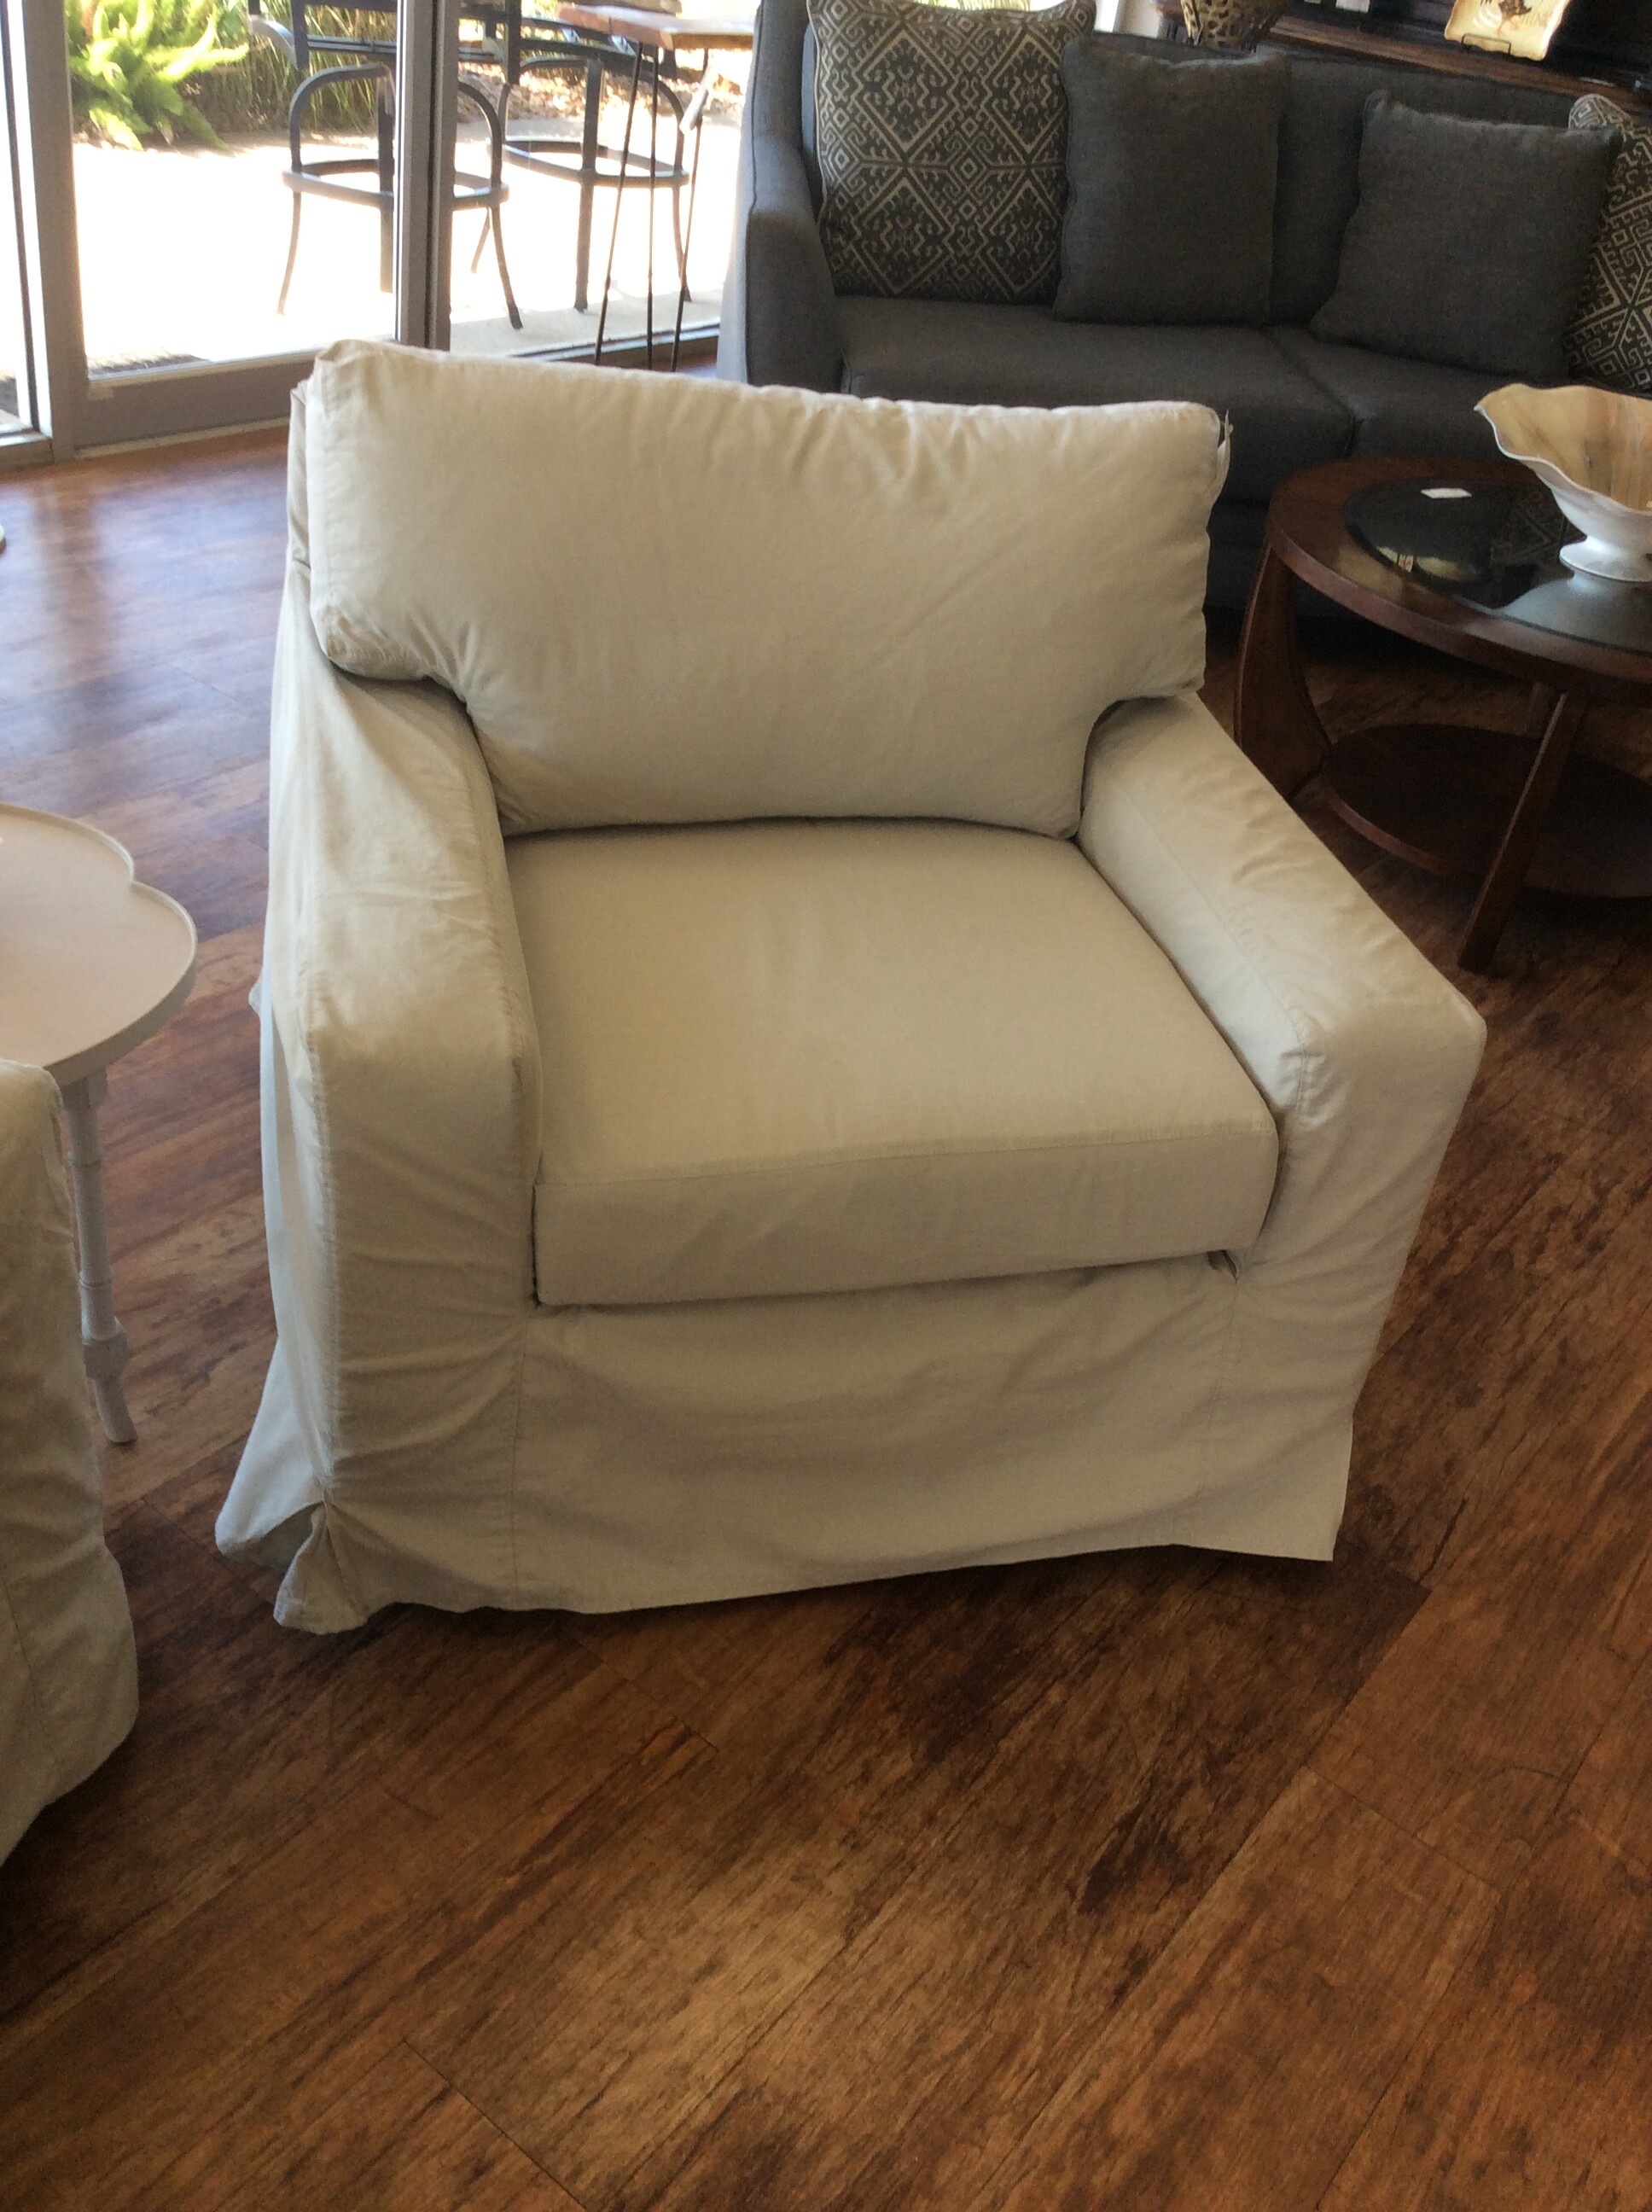 This is a beautiful, white slip covered oversized chair.